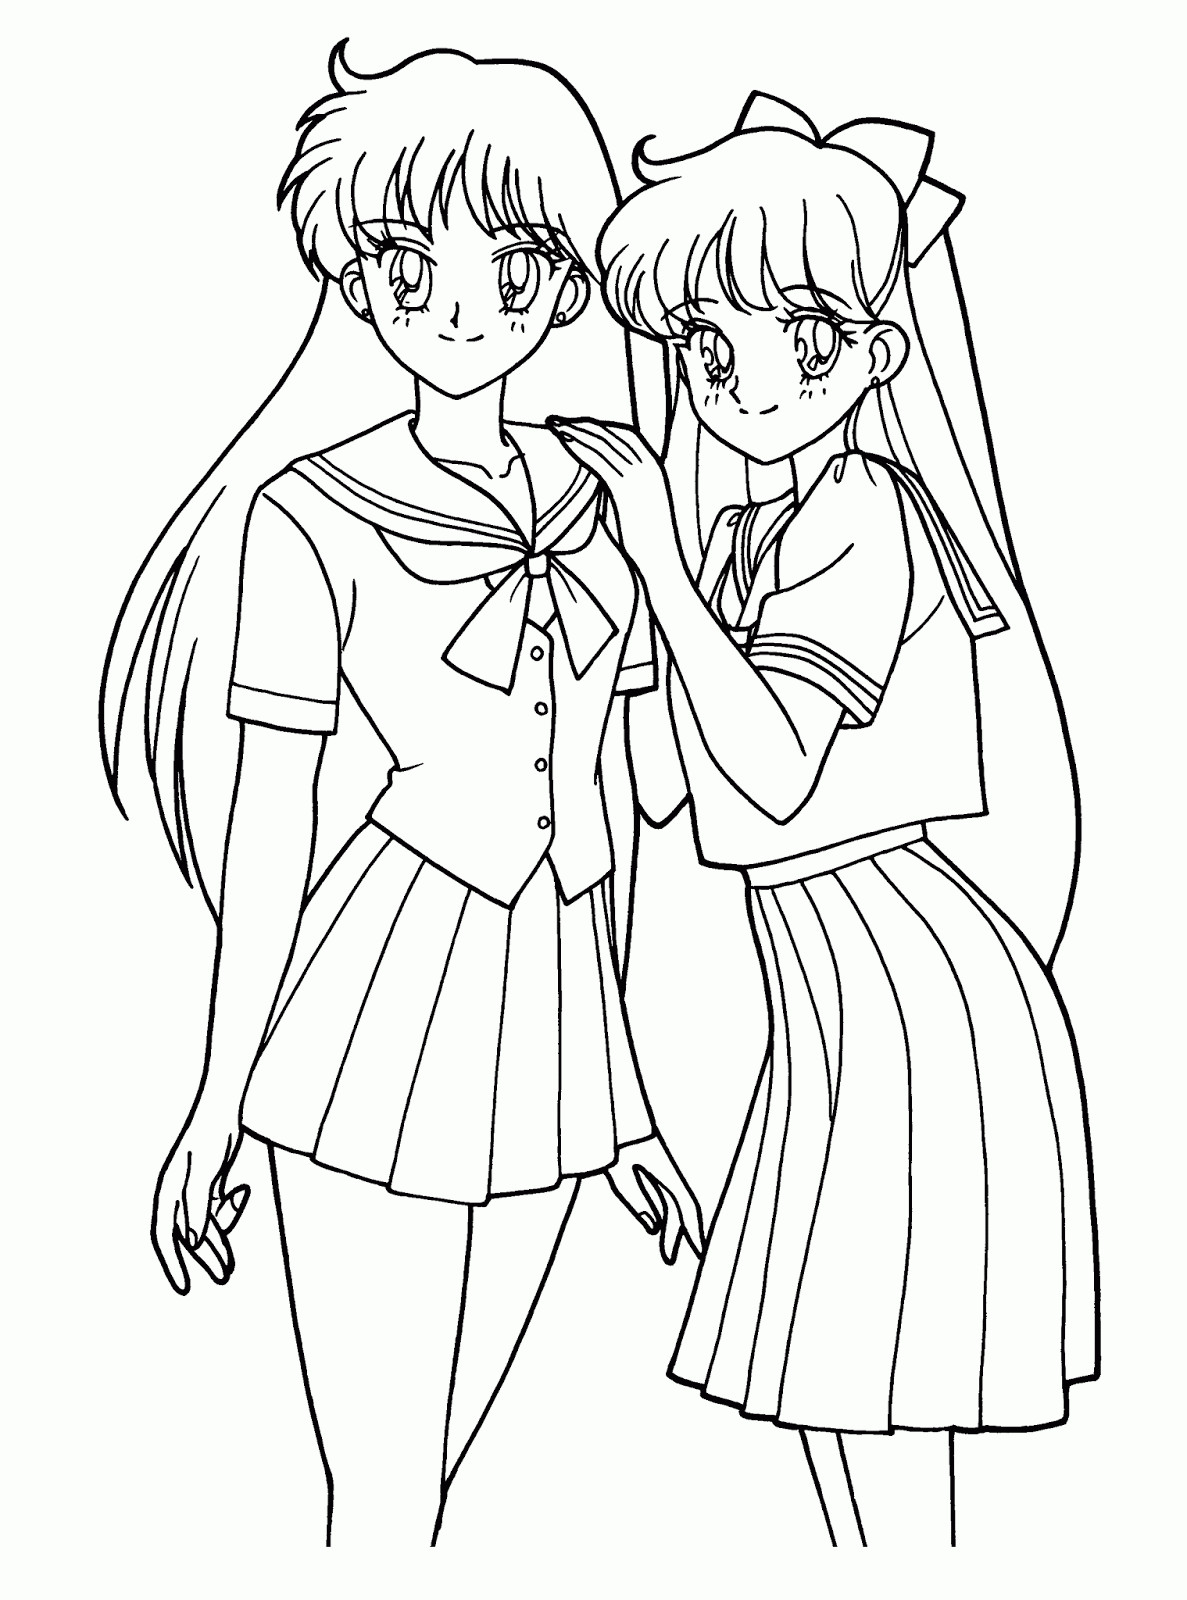 Anime Coloring Pages Boys
 Anime Coloring Pages Best Coloring Pages For Kids